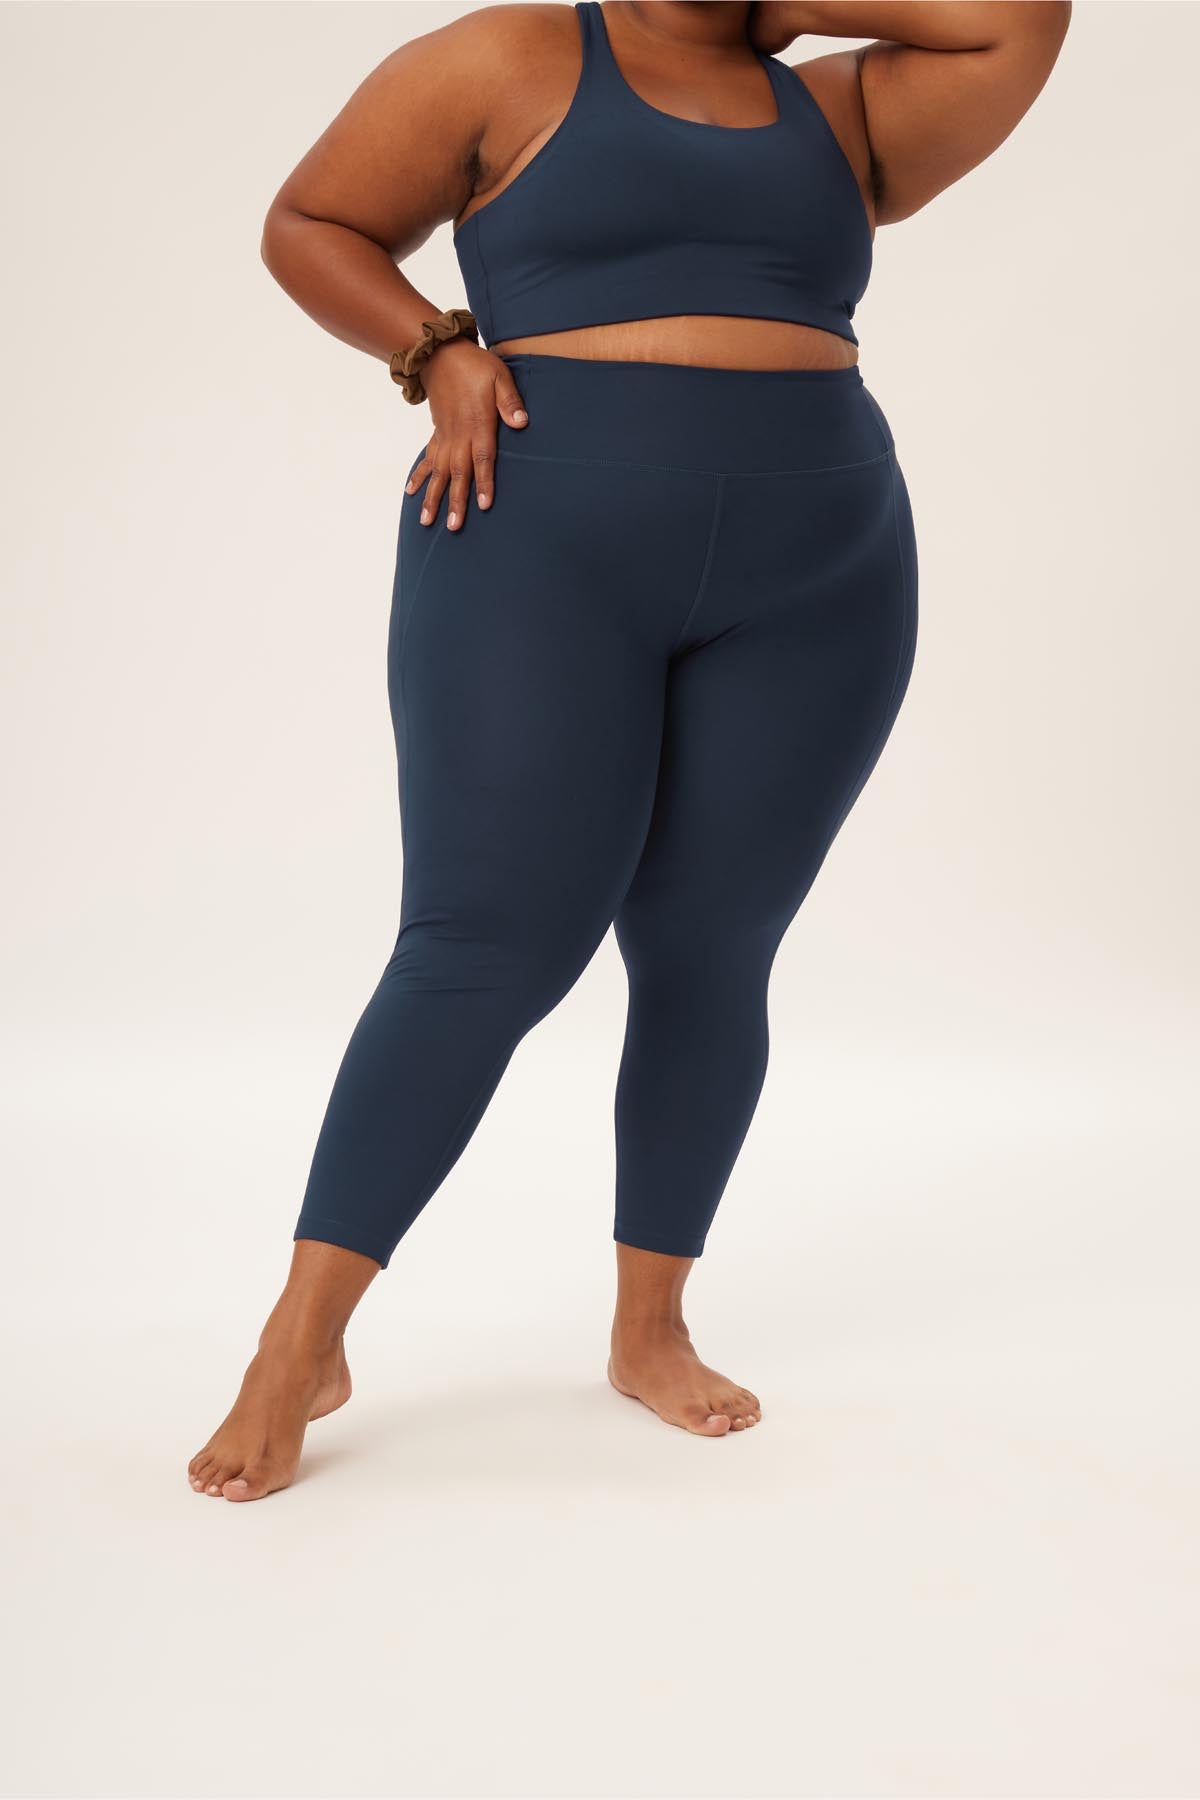 29 Best Plus-Size Workout Clothes 2020 | The Strategist | New York Magazine